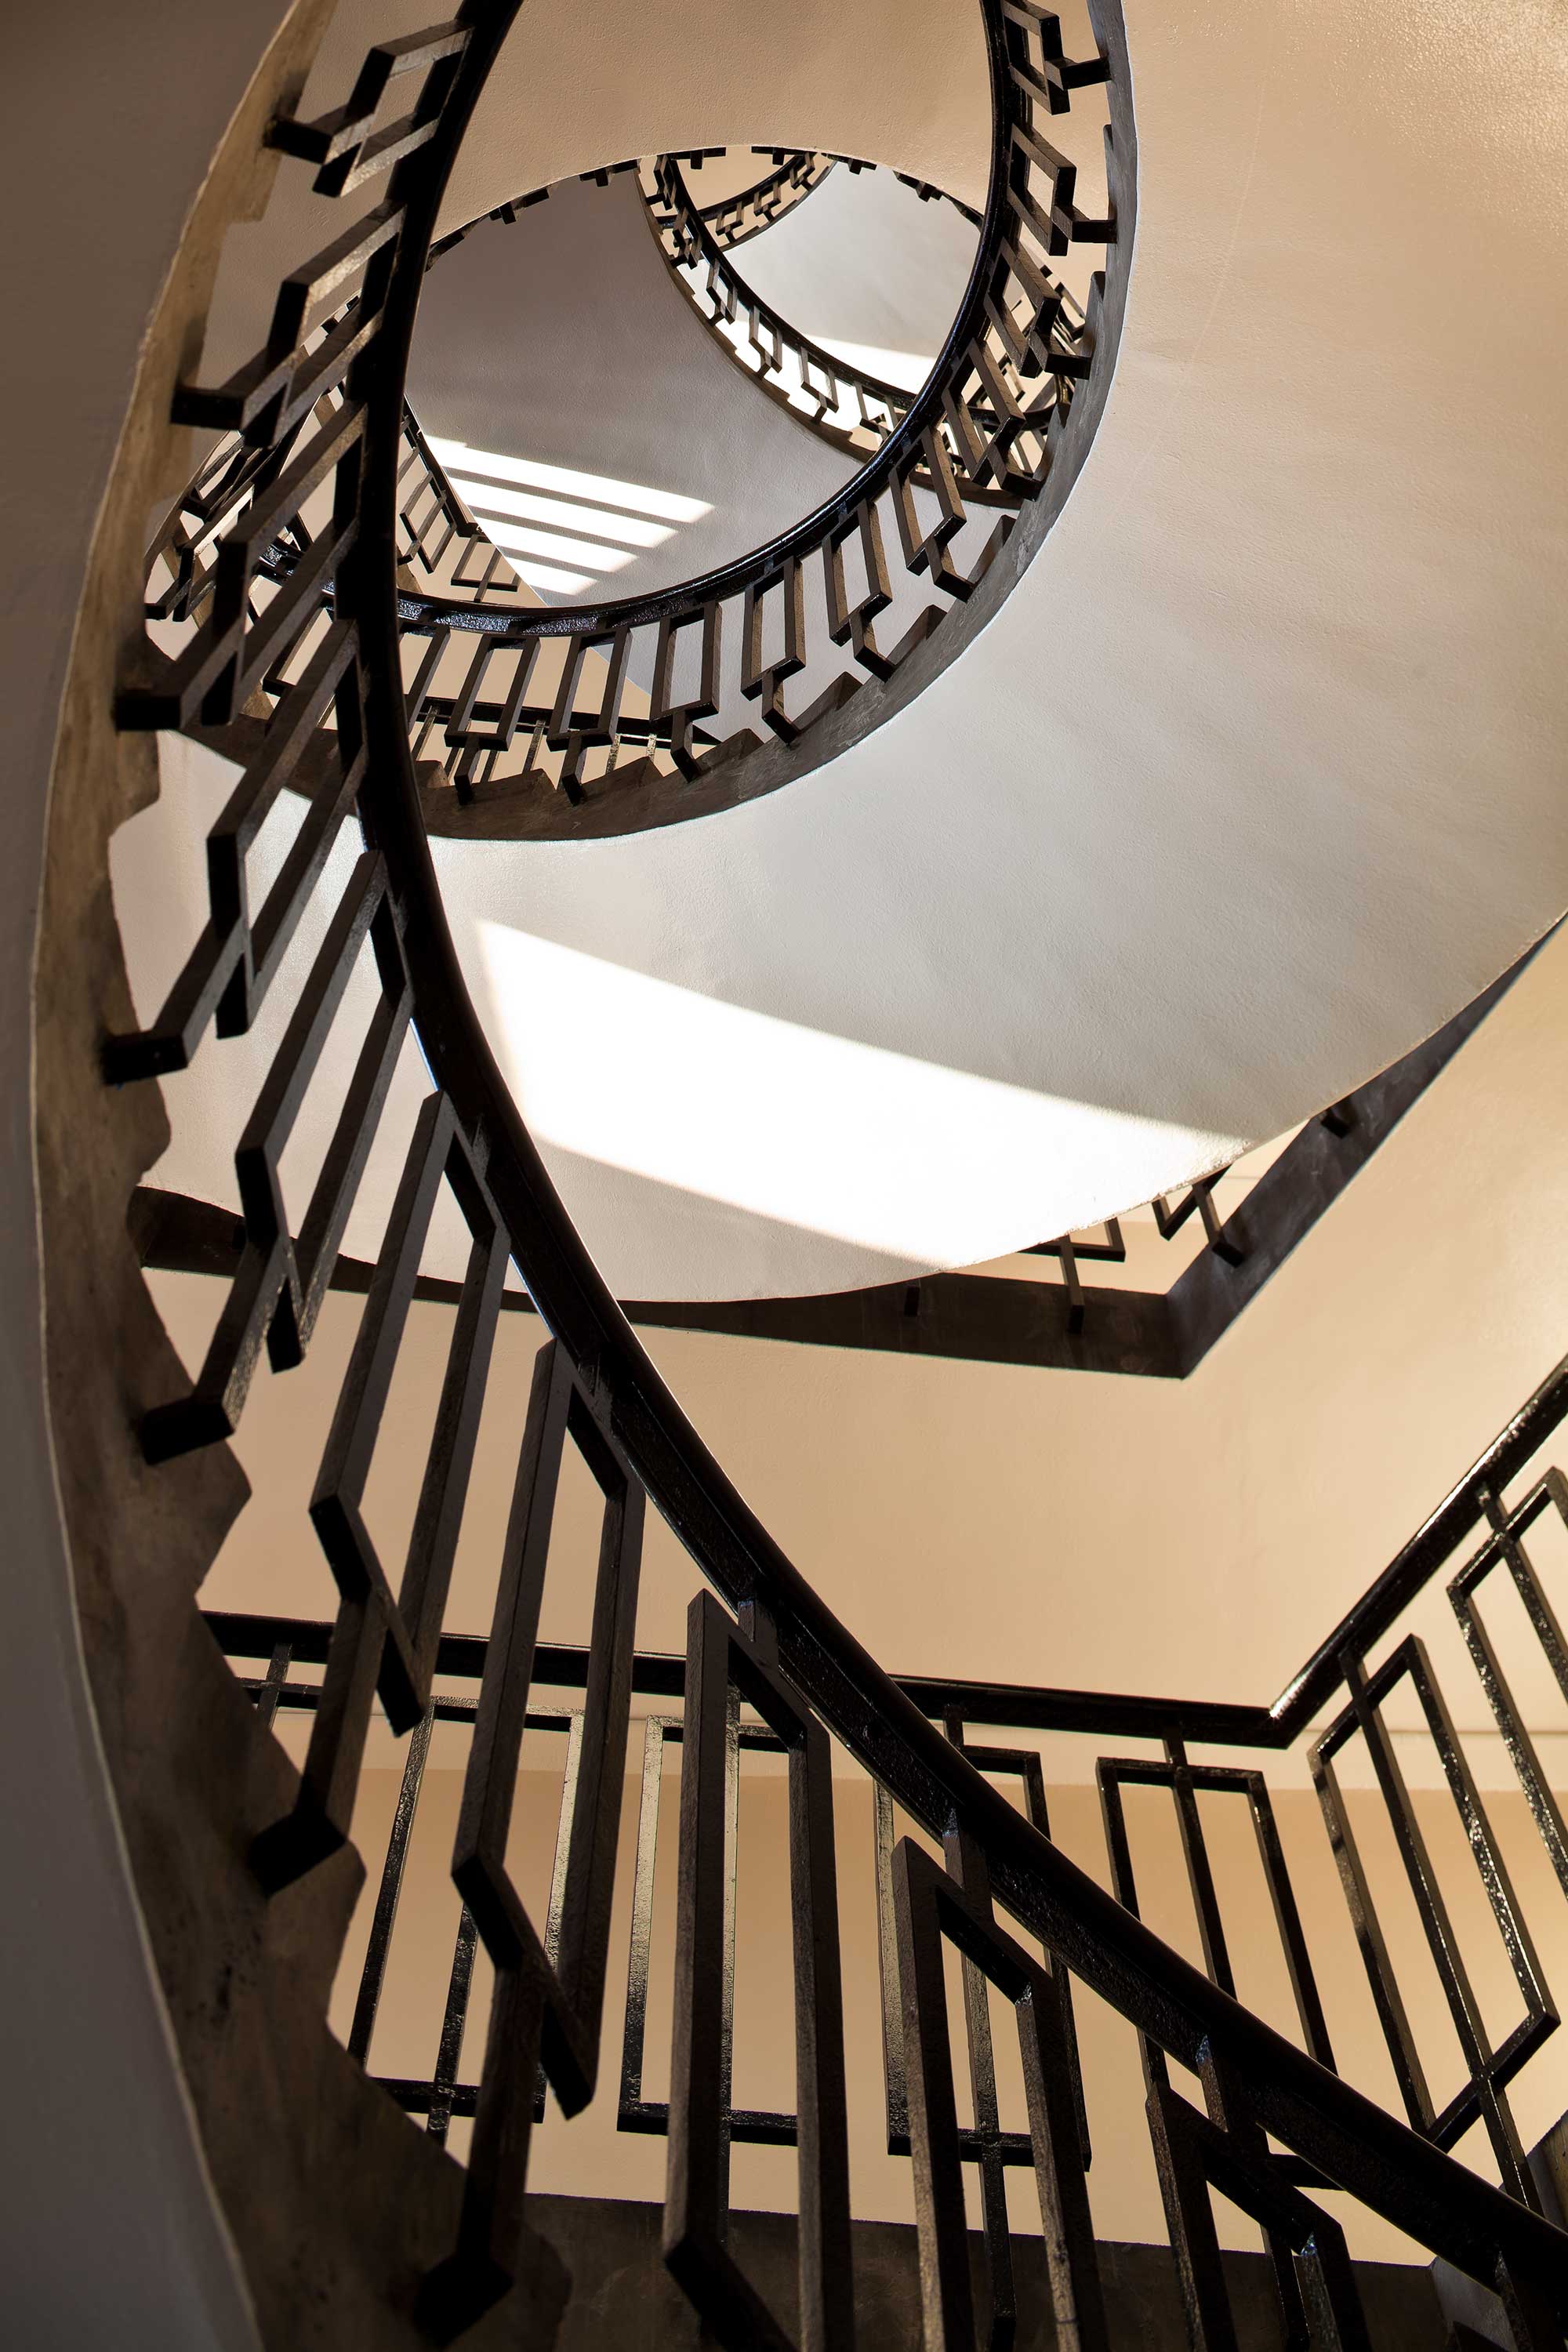 A communal spiral staircases